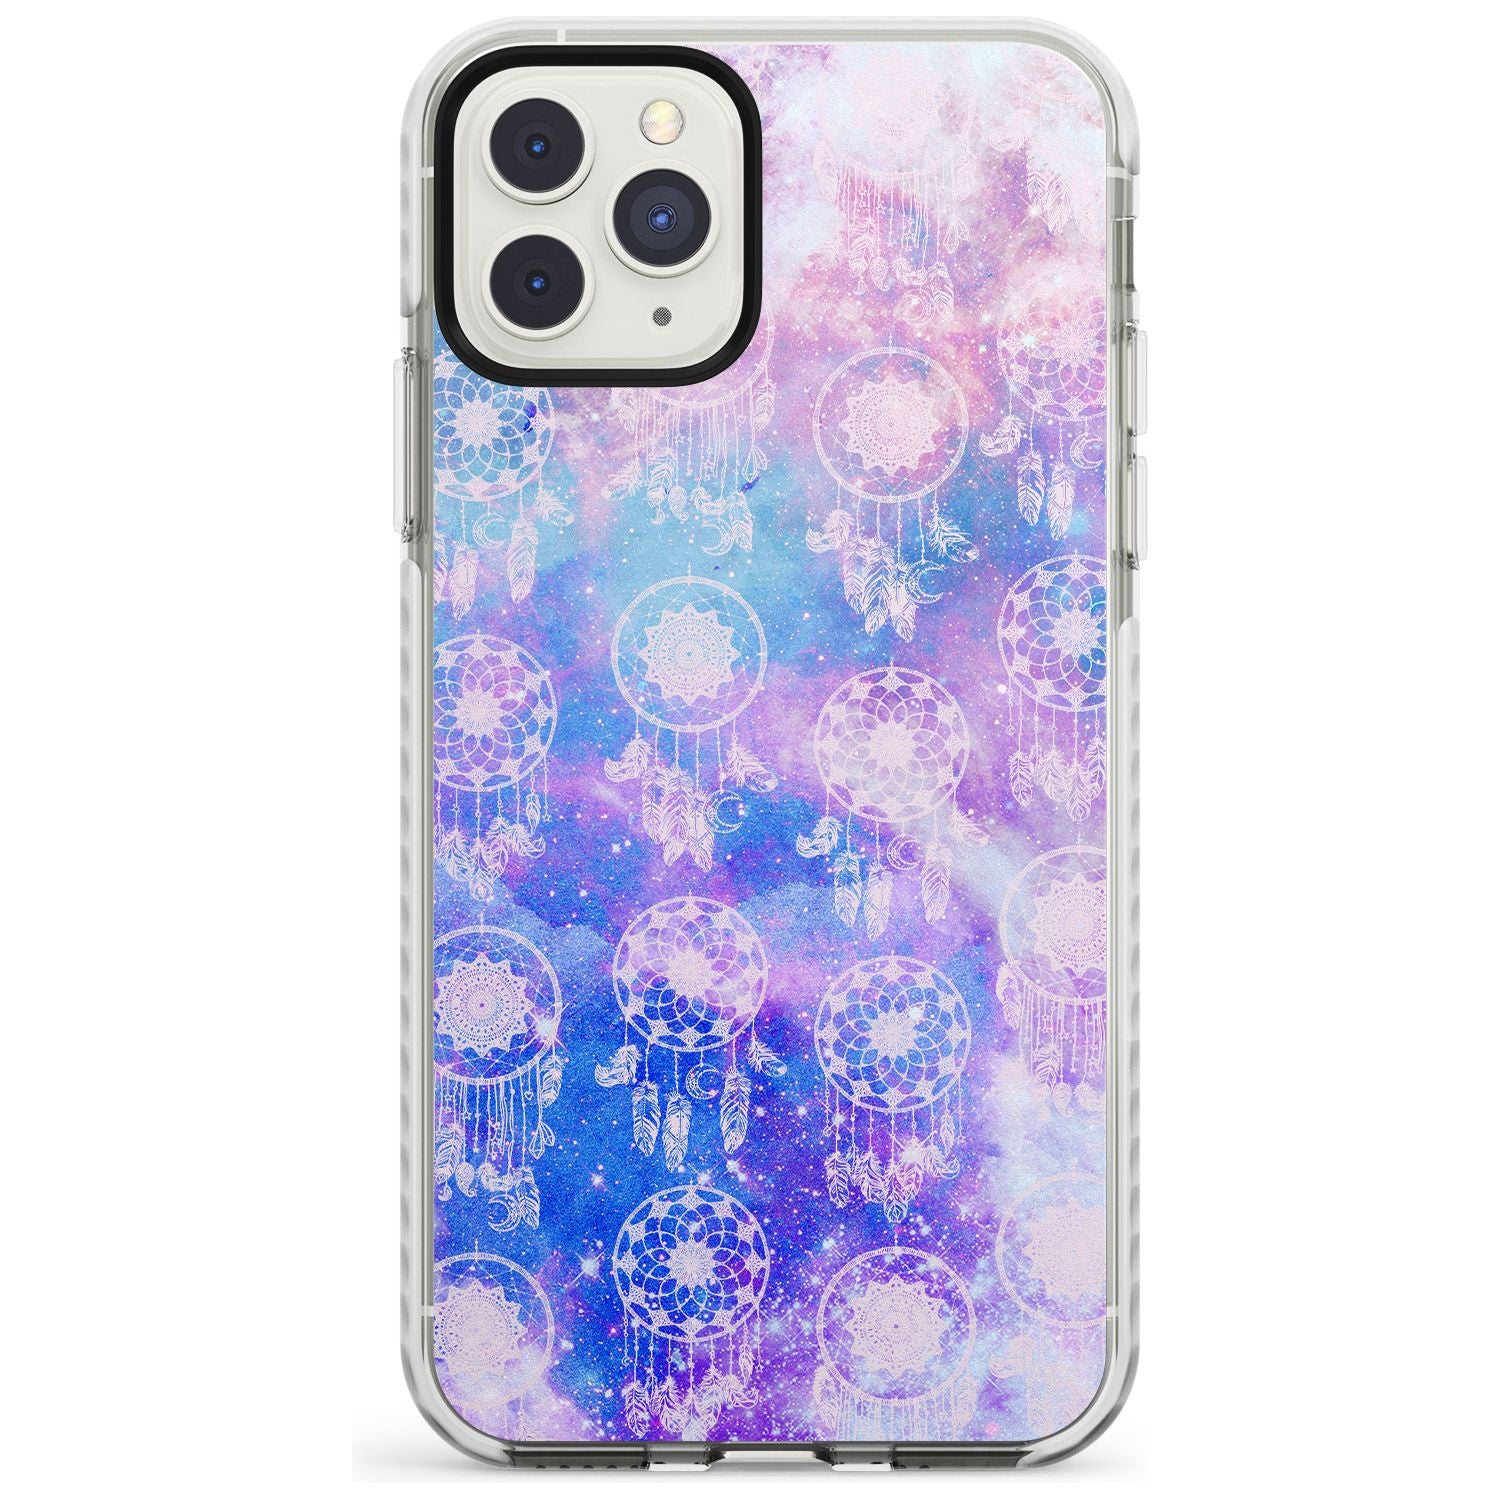 Dreamcatcher Pattern Galaxy Print Tie Dye Impact Phone Case for iPhone 11 Pro Max